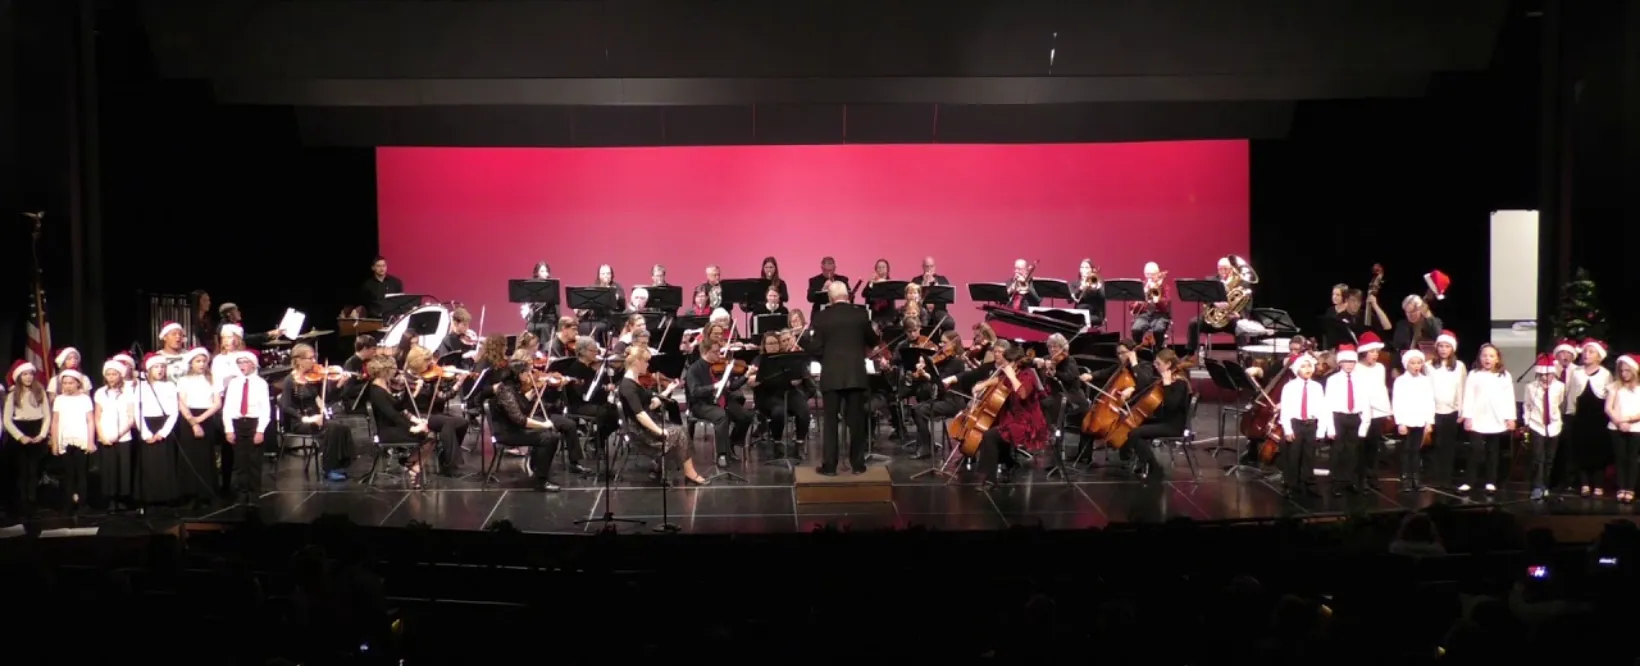 A full orchestra performing.